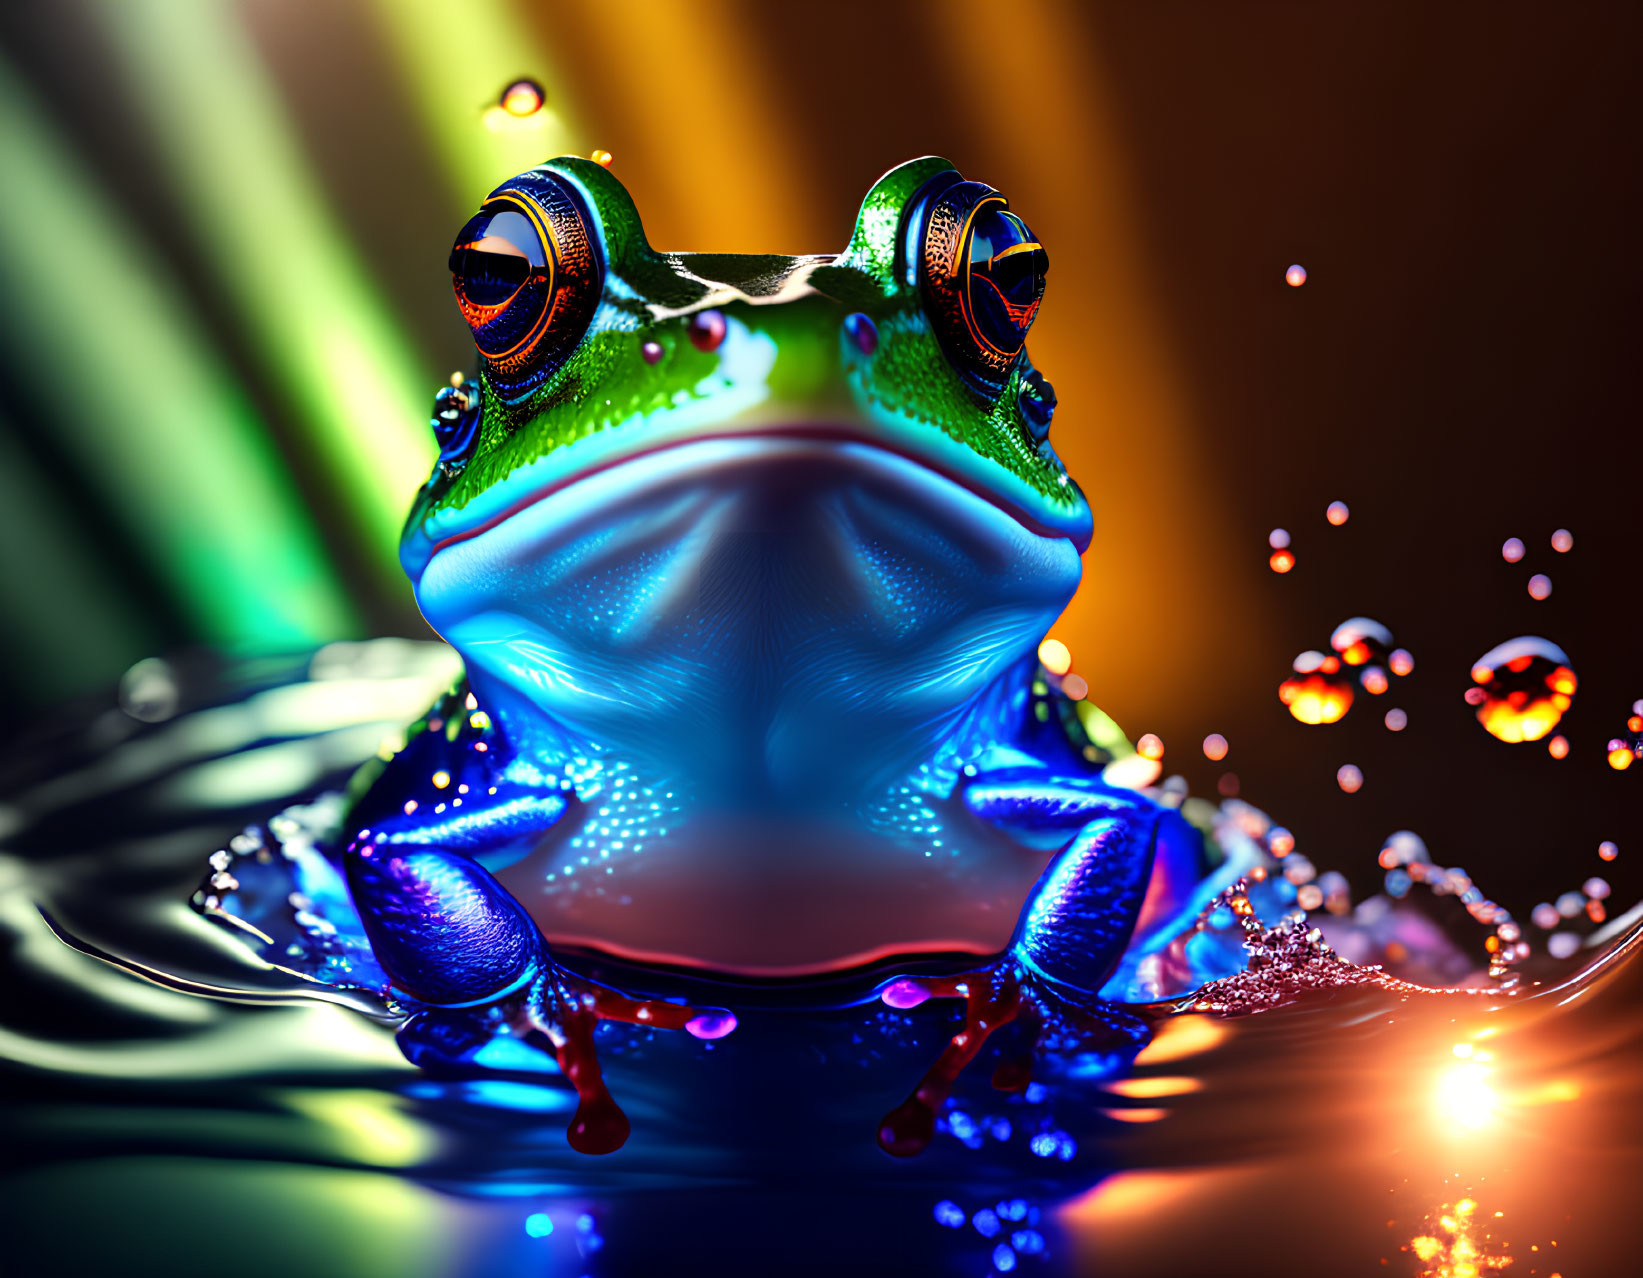 Colorful Frog Illustration with Glossy Rainbow Skin and Bulging Eyes